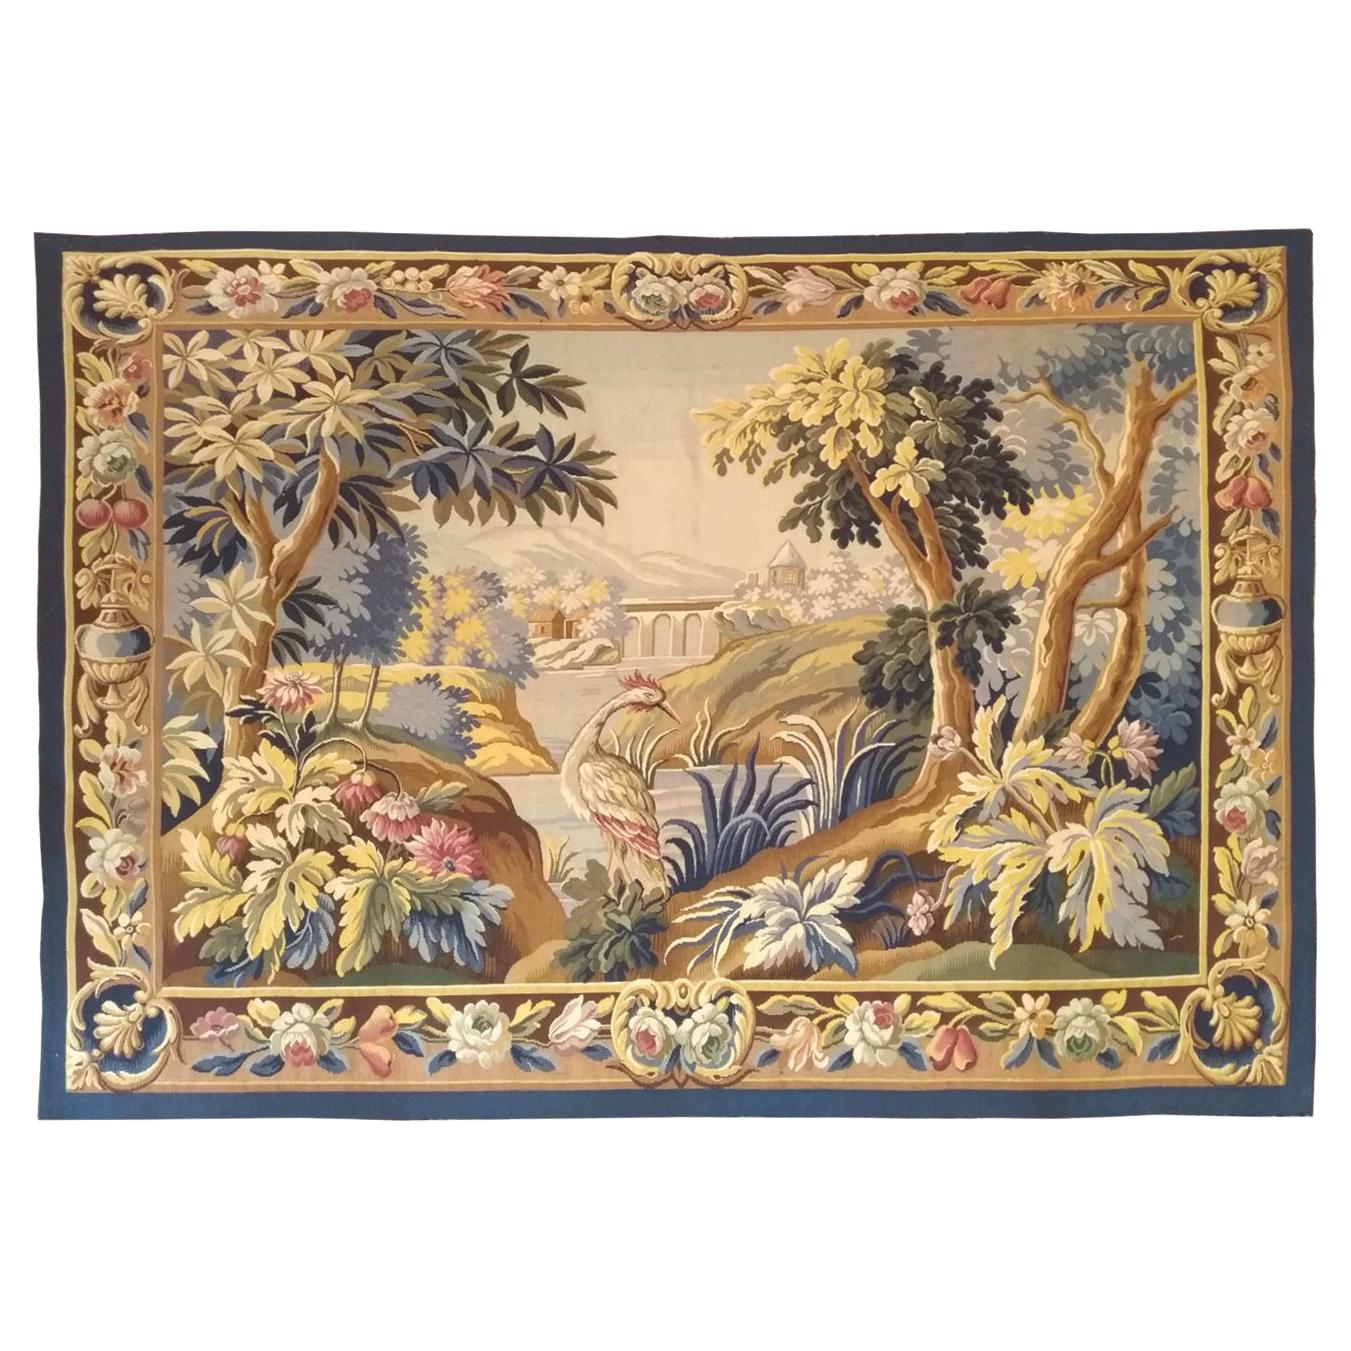 1037 - Aubusson 19th Century Tapestry